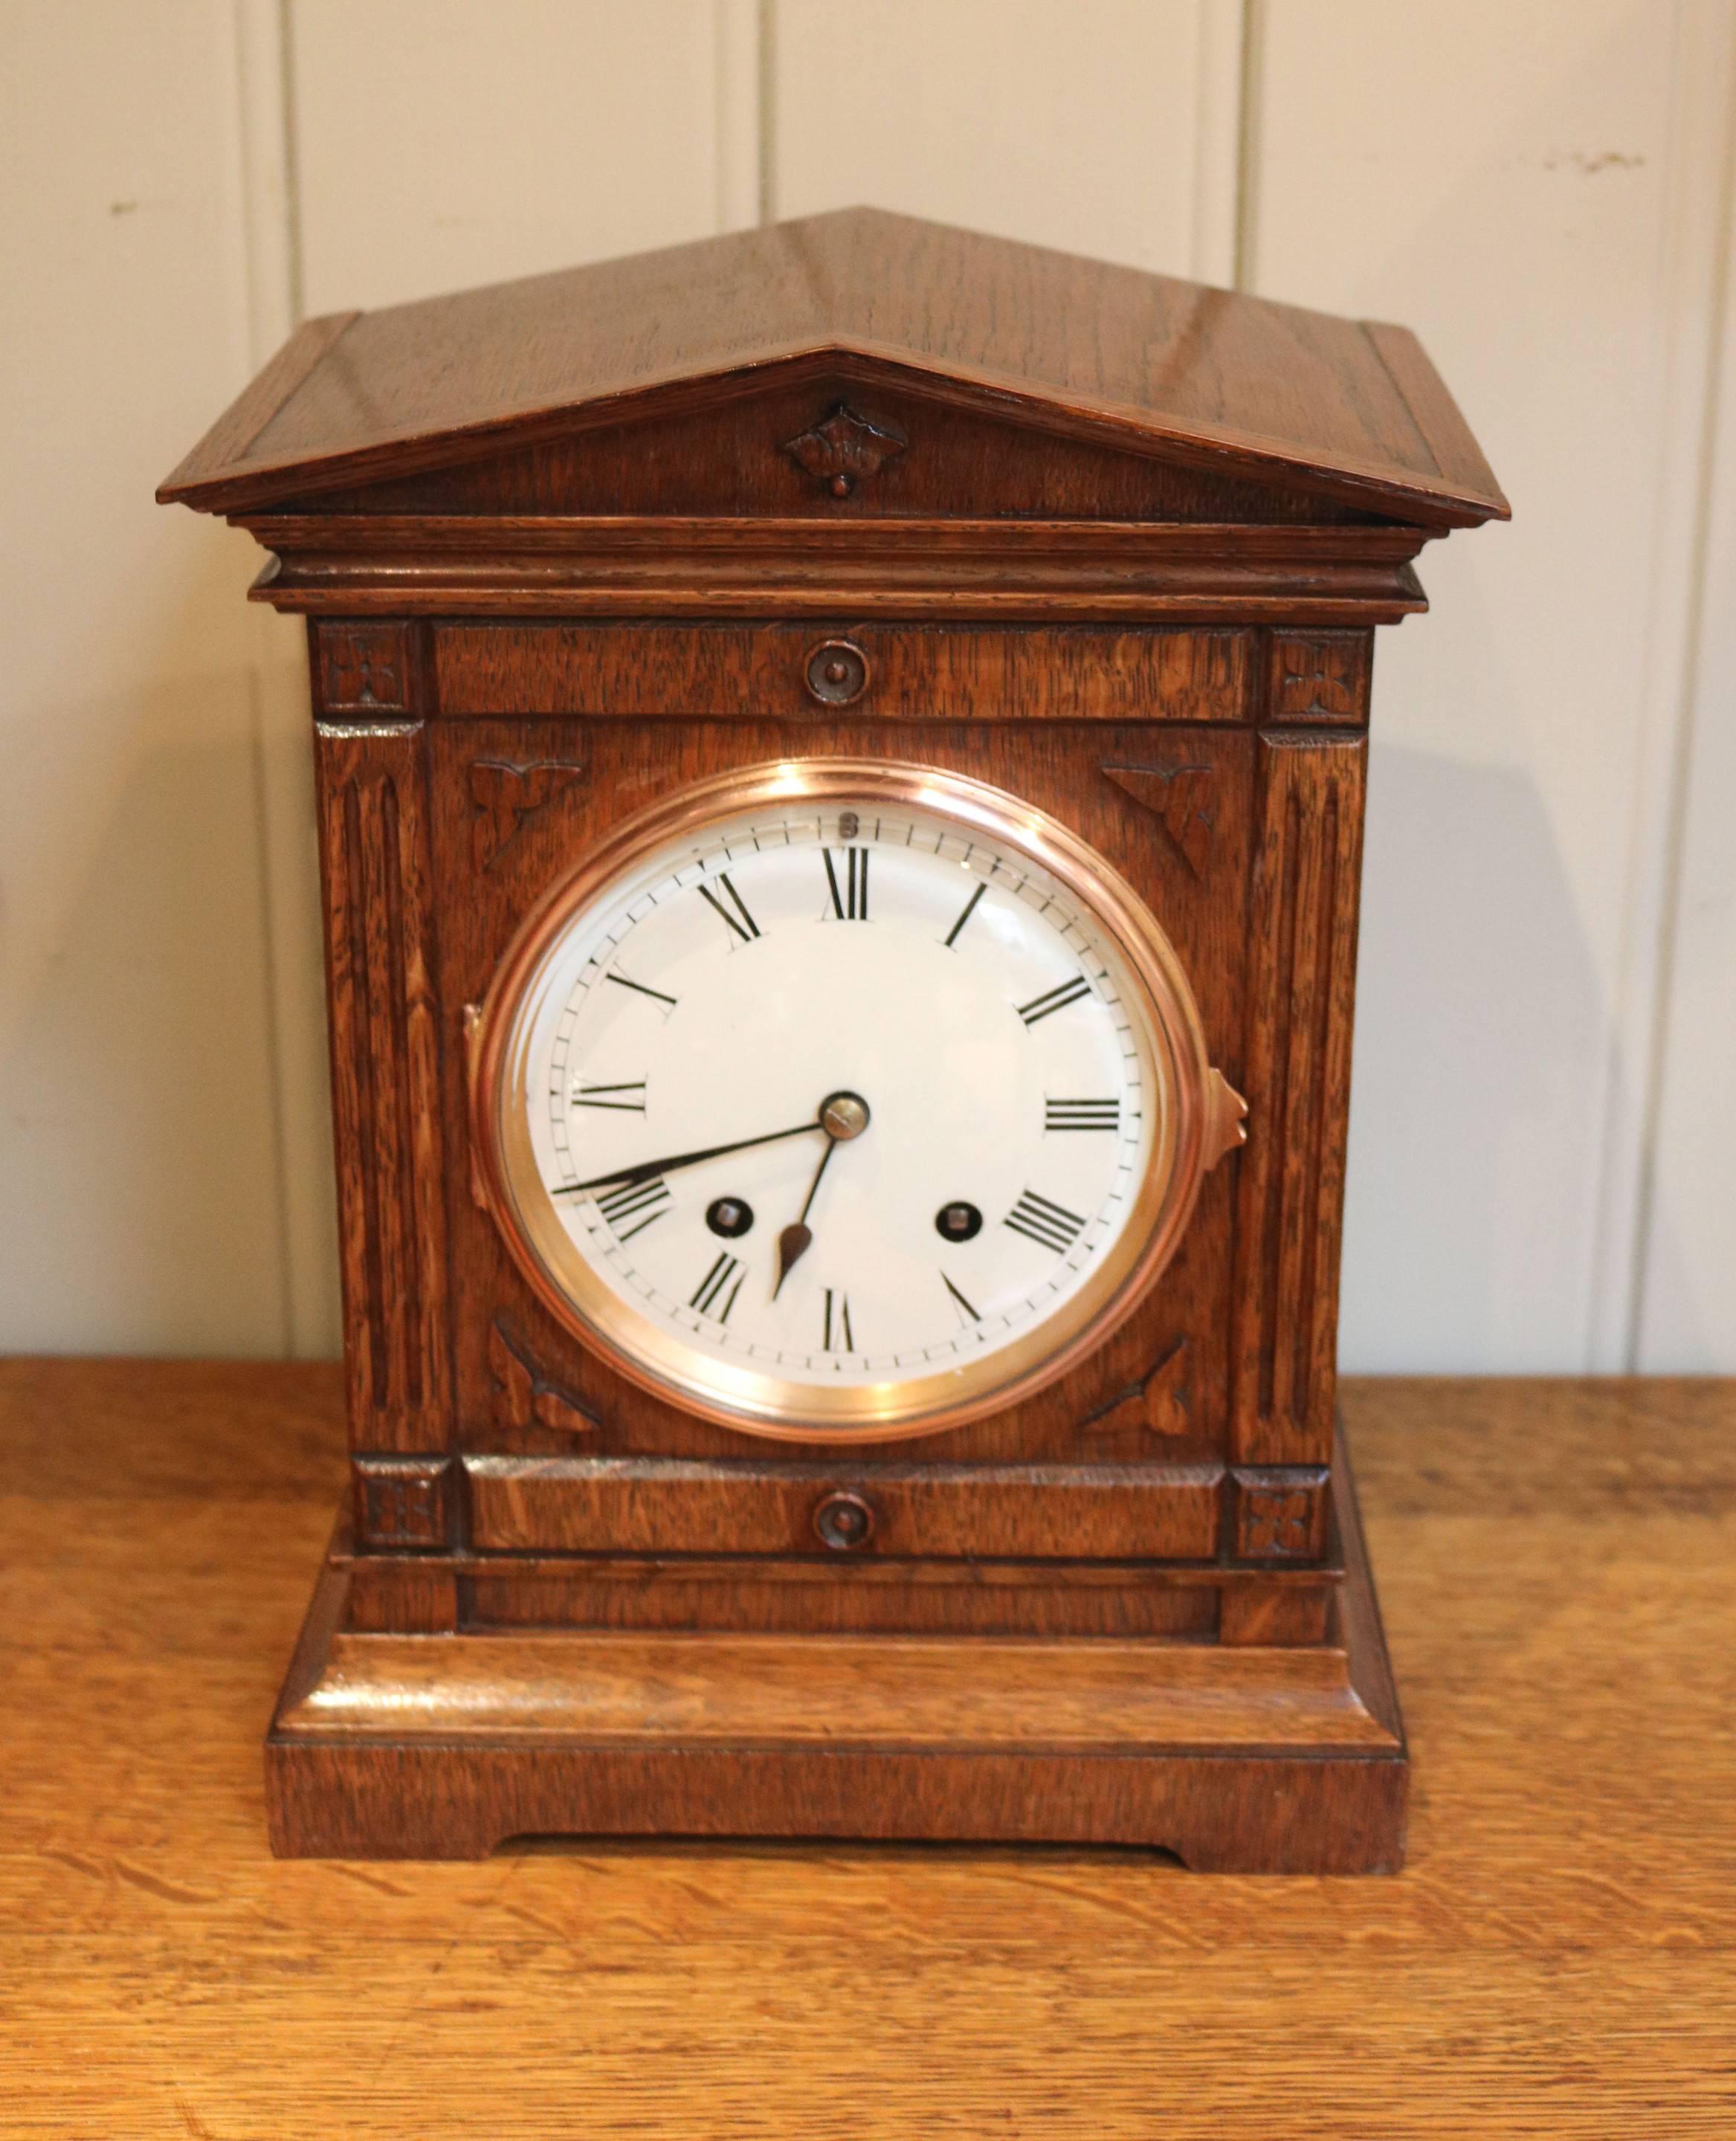 An Edwardian striking mantel clock, dating to 1906. The architectural case has reeded side columns and mounted turned roundels. It has a circular dial with a copper bezel and a bevel edge convex glass. The 8 day pendulum movement strikes the hours